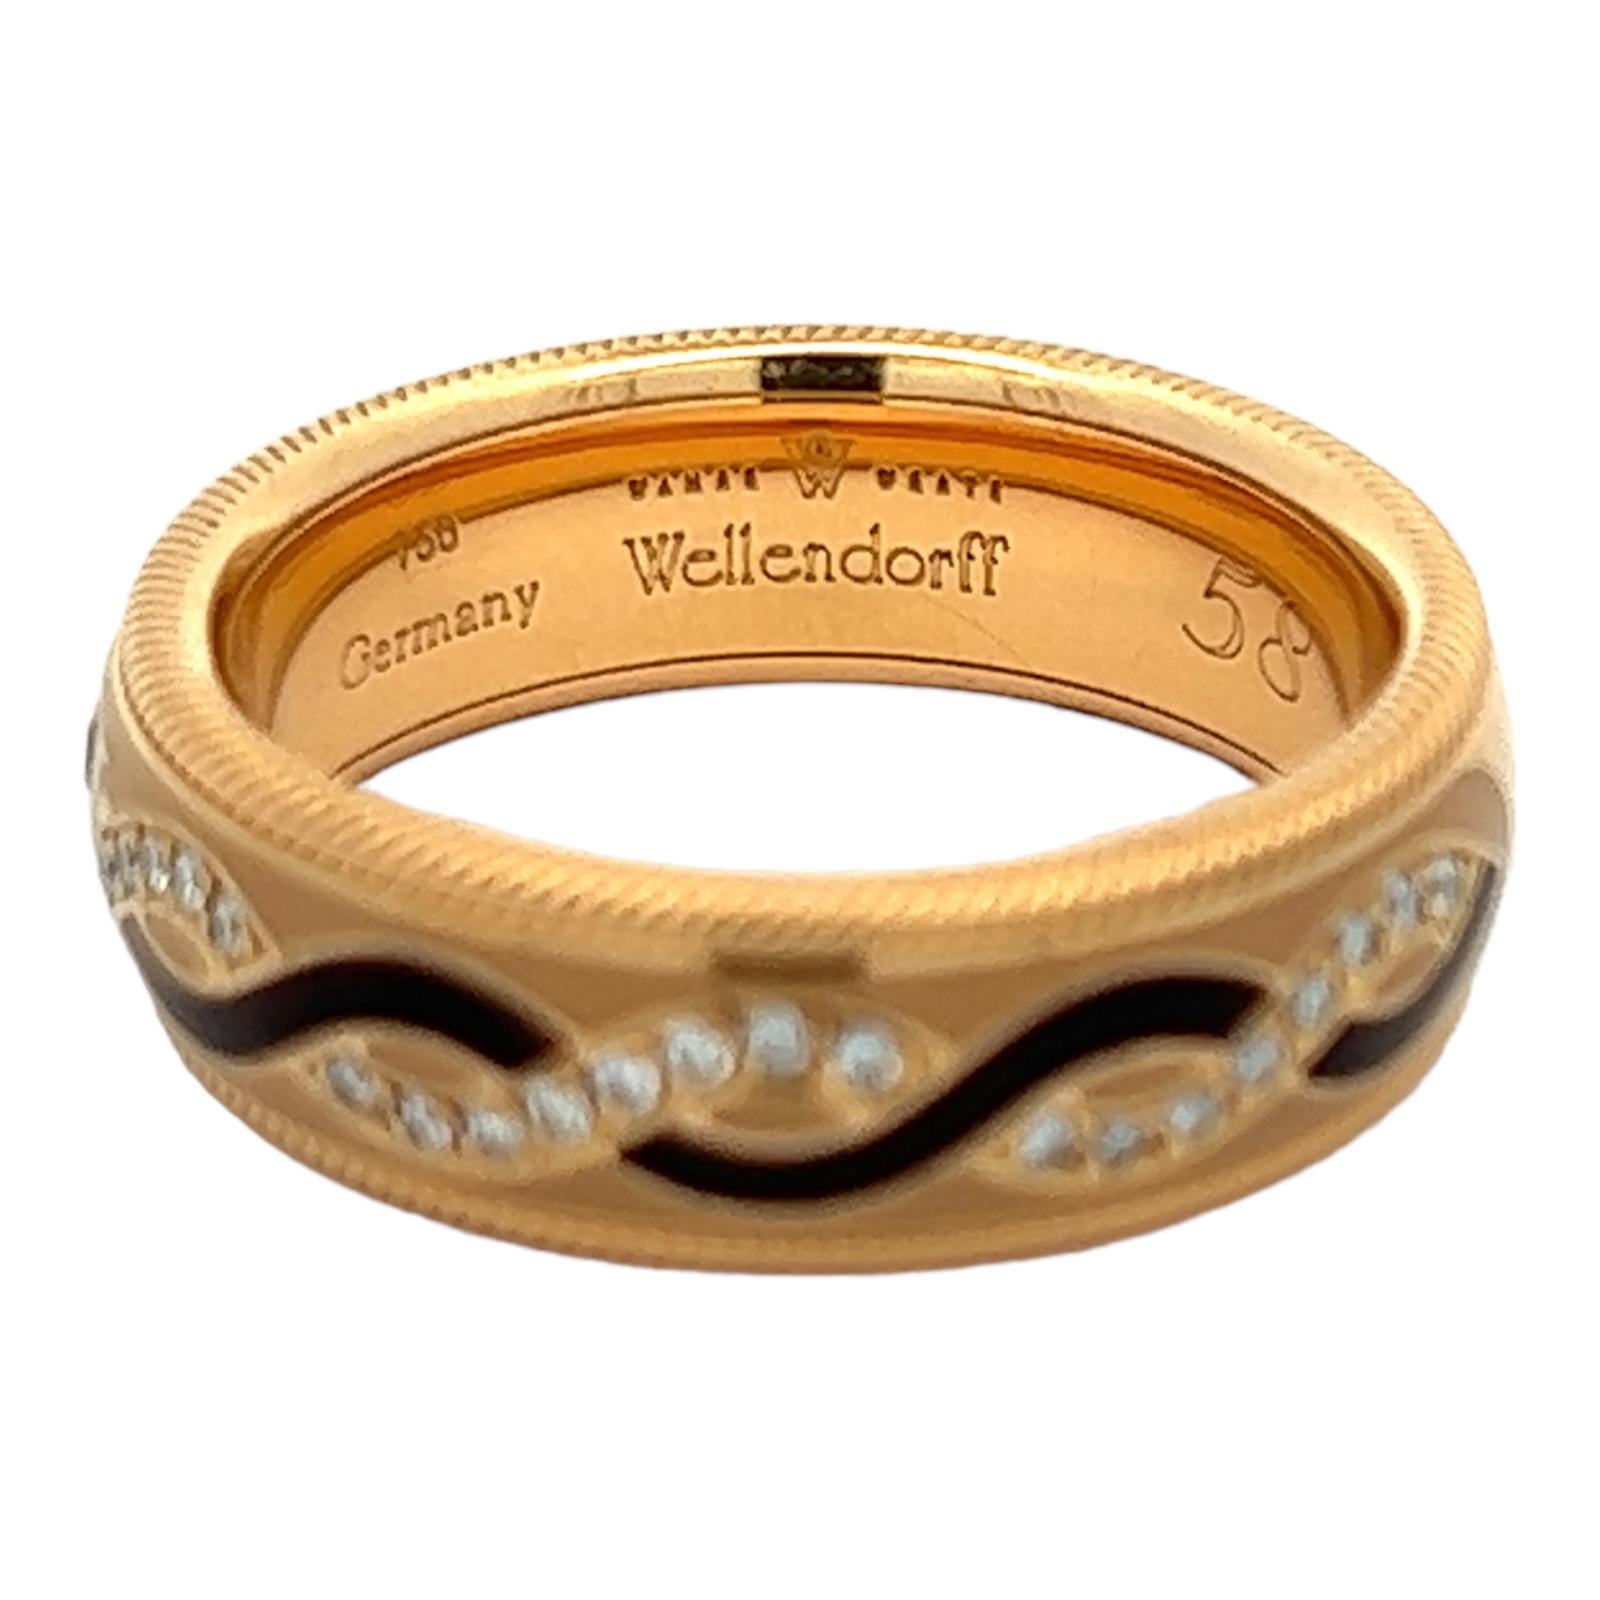 Beautifully crafted diamond and enamel spinner ring by German designer Wellendorf. The 18 karat yellow gold band features black enamel design interlocking with 42 round brilliant cut diamonds weighing approximately .33 carat total weight. Textured